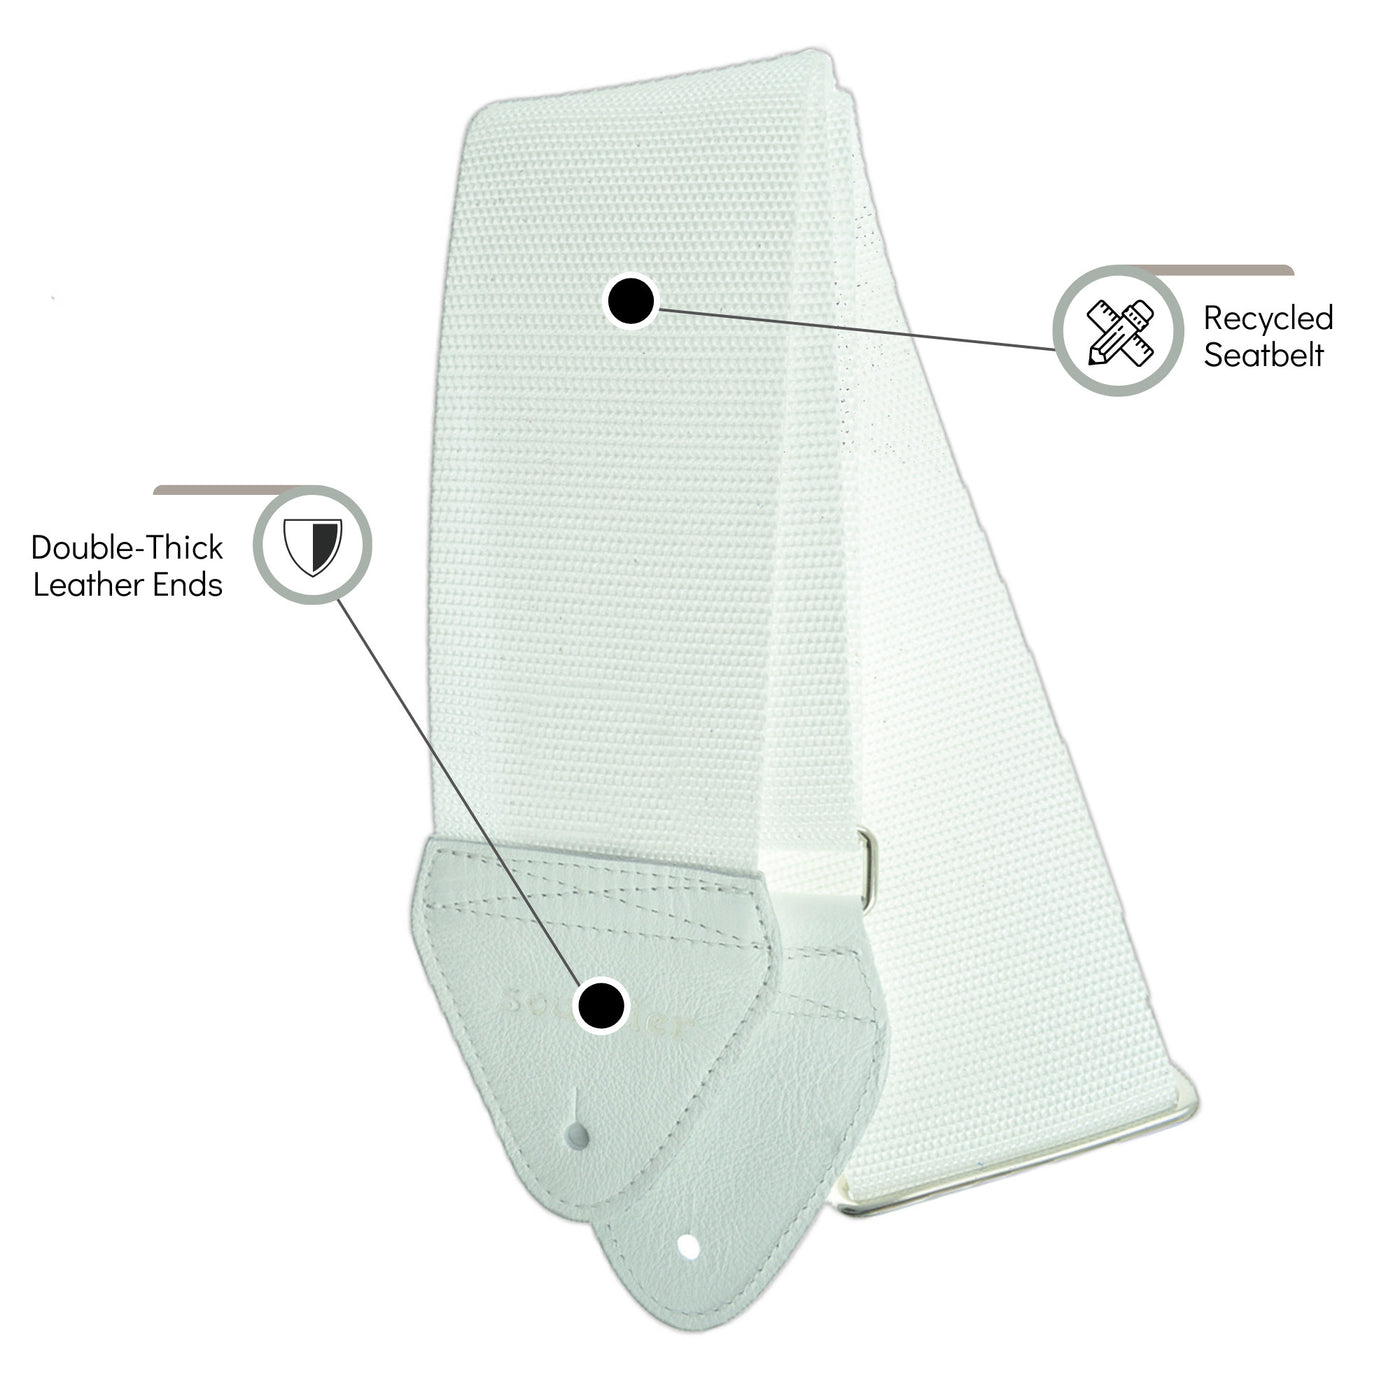 Souldier GT0000WH02WH - Handmade Souldier Solid Bass Strap, 3 Inches Wide and Adjustable from 33" to 60" Made in the USA, White